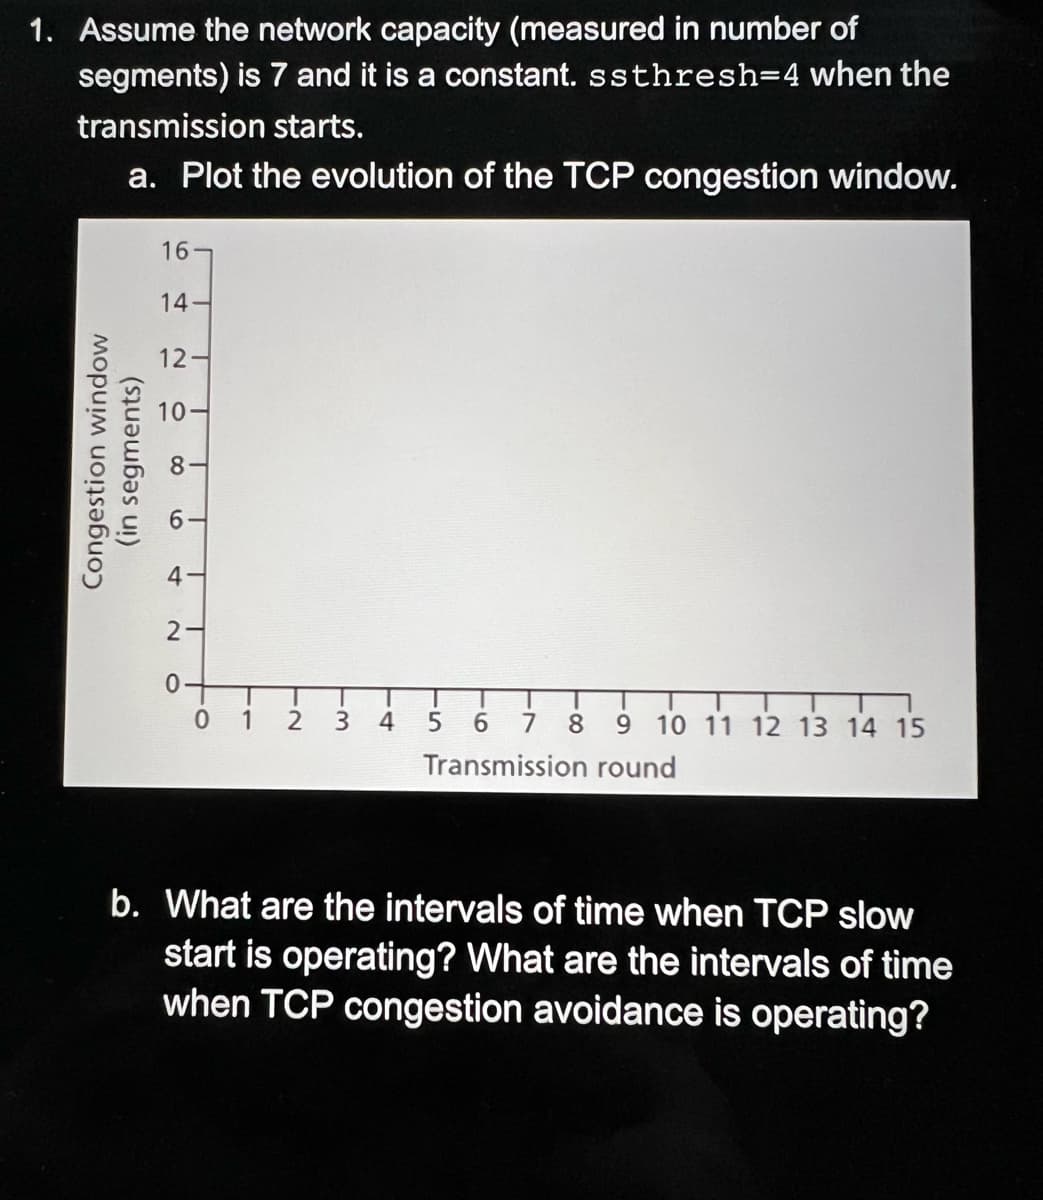 1. Assume the network capacity (measured in number of
segments) is 7 and it is a constant. ssthresh=4 when the
transmission starts.
a. Plot the evolution of the TCP congestion window.
Congestion window
(in segments)
16
14-
12
10
00
9
4
2-
0
0
1
1
2 3 4
T
5 6 7 8 9 10 11 12 13 14 15
Transmission round
b. What are the intervals of time when TCP slow
start is operating? What are the intervals of time
when TCP congestion avoidance is operating?